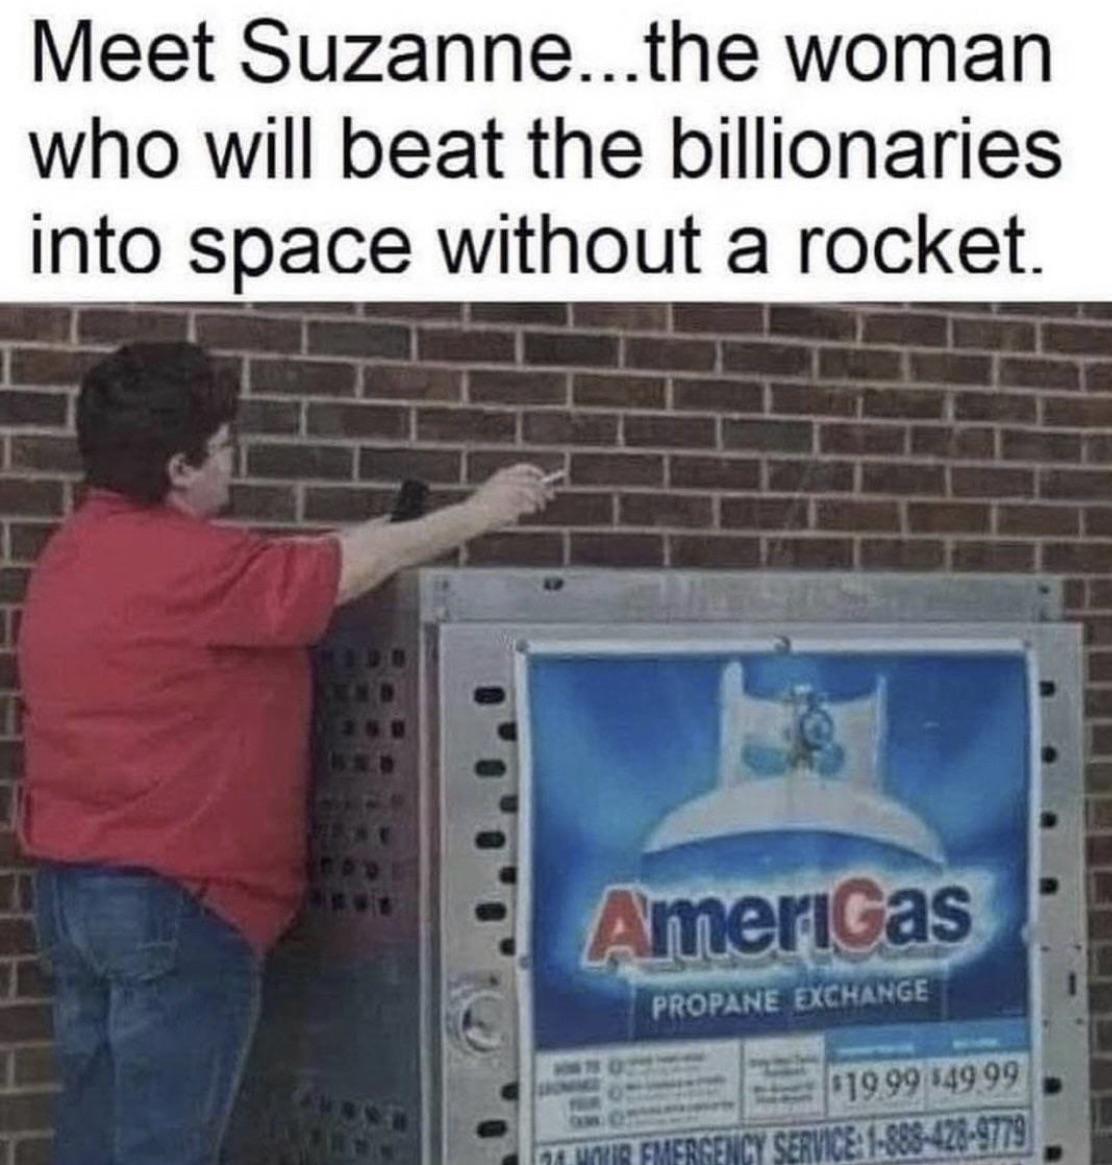 funny memes - dank memes - smoking next to a propane tank - Meet Suzanne...the woman who will beat the billionaries into space without a rocket AmeriGas Propane Exchange 1999 549 99 Wir Emergency Service 18884289779